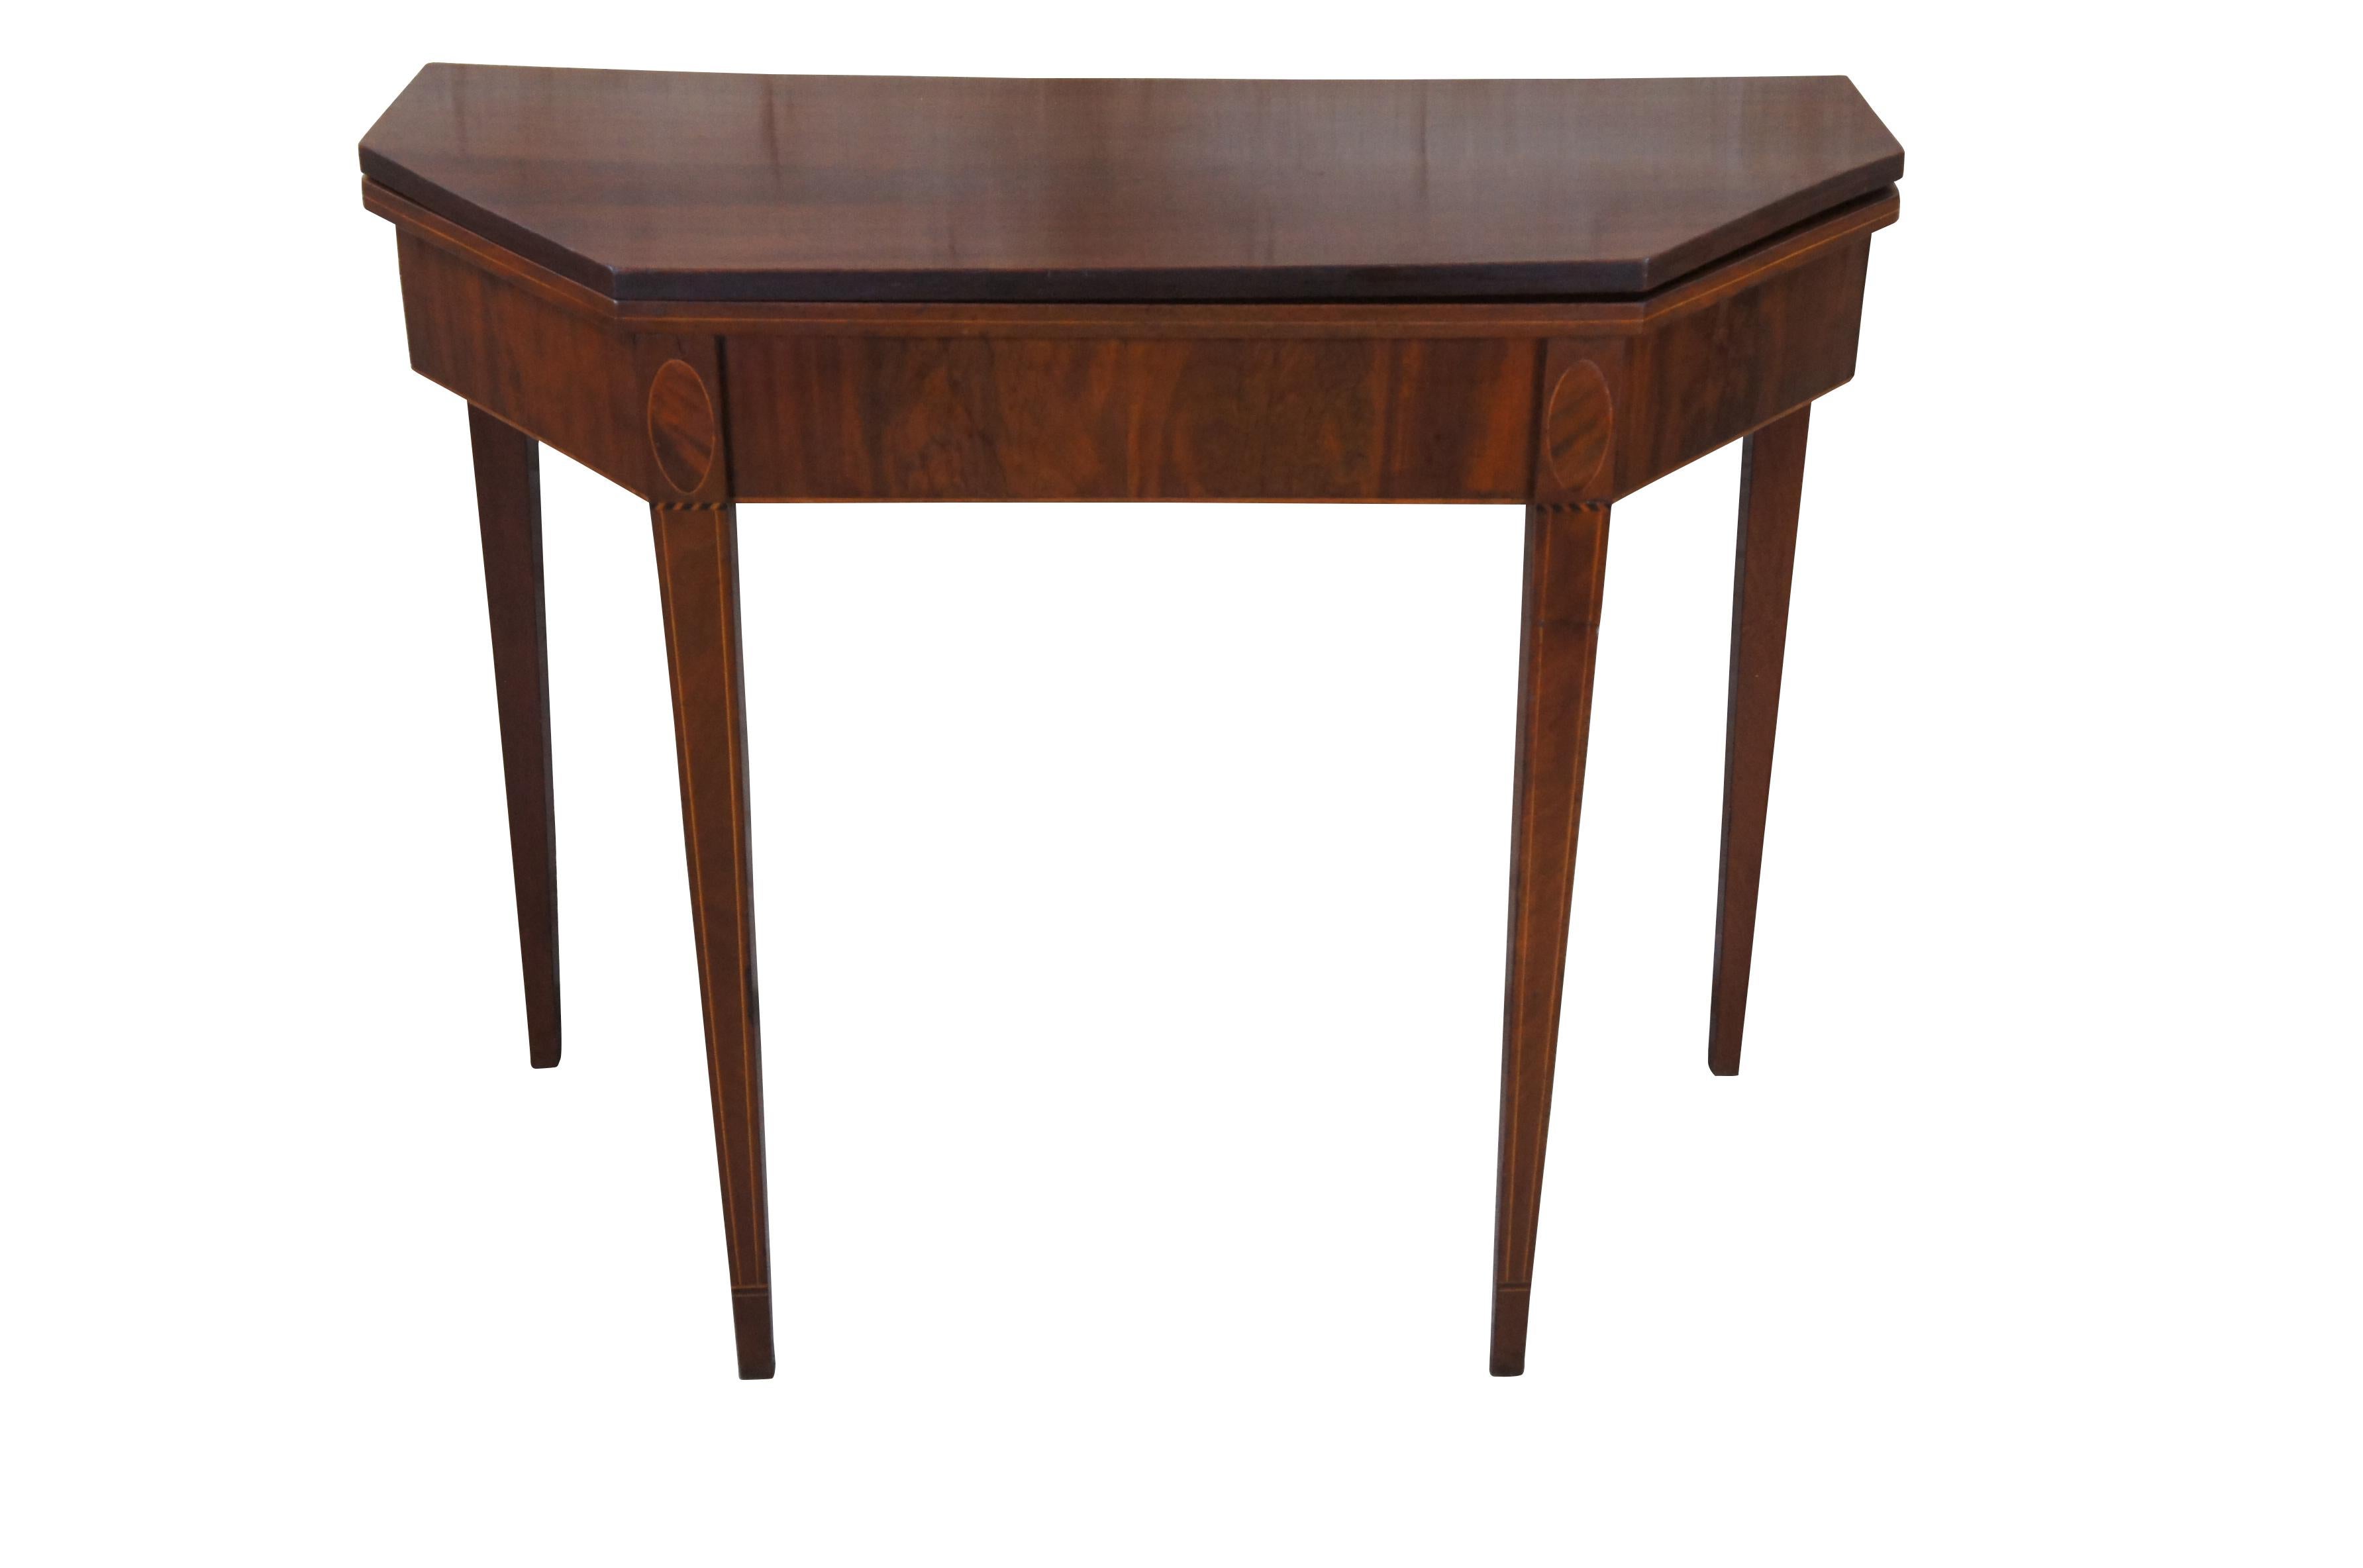 Antique Sheraton period card or game table, circa 1790-1820.  Made from mahogany with crotch mahogany veneer, featuring an inlaid flip top octagonal demilune top supported by square tapered legs.  Each leg showcases oval inlay over striping and